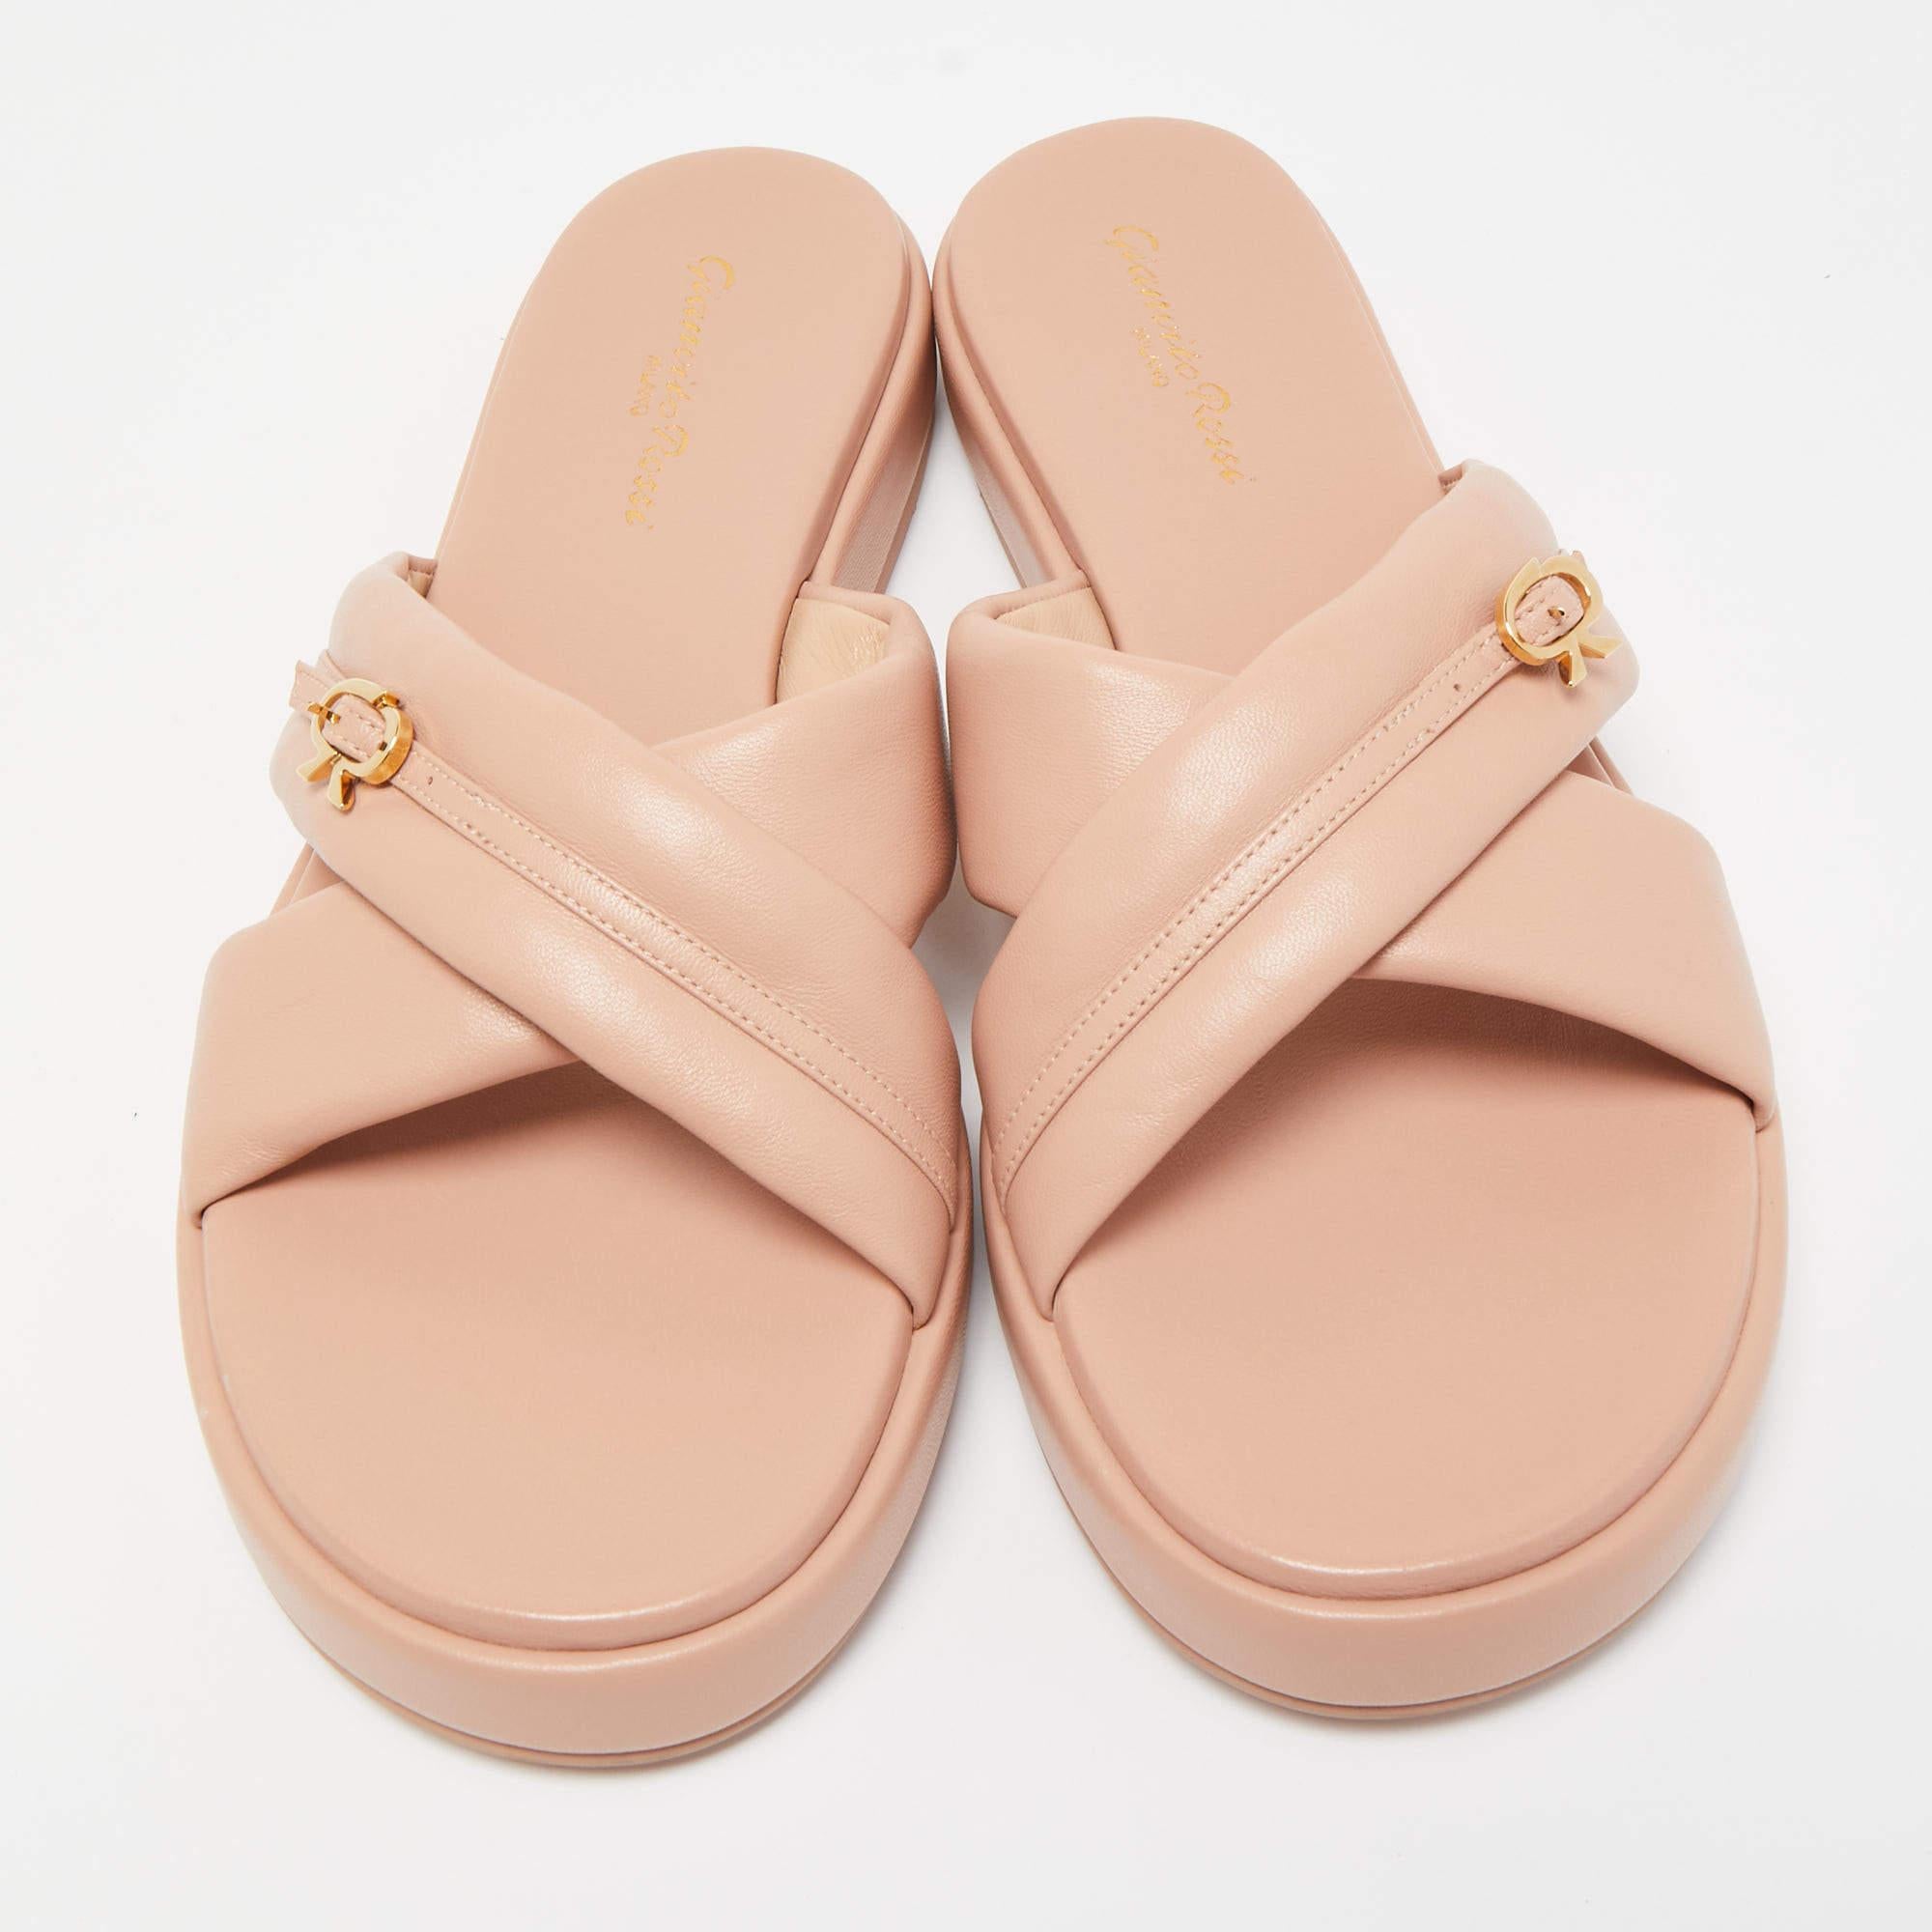 Enhance your casual looks with a touch of high style with these designer slides. Rendered in quality material with a lovely hue adorning its expanse, this pair is a must-have!

Includes: Original Dustbag, Original Box

